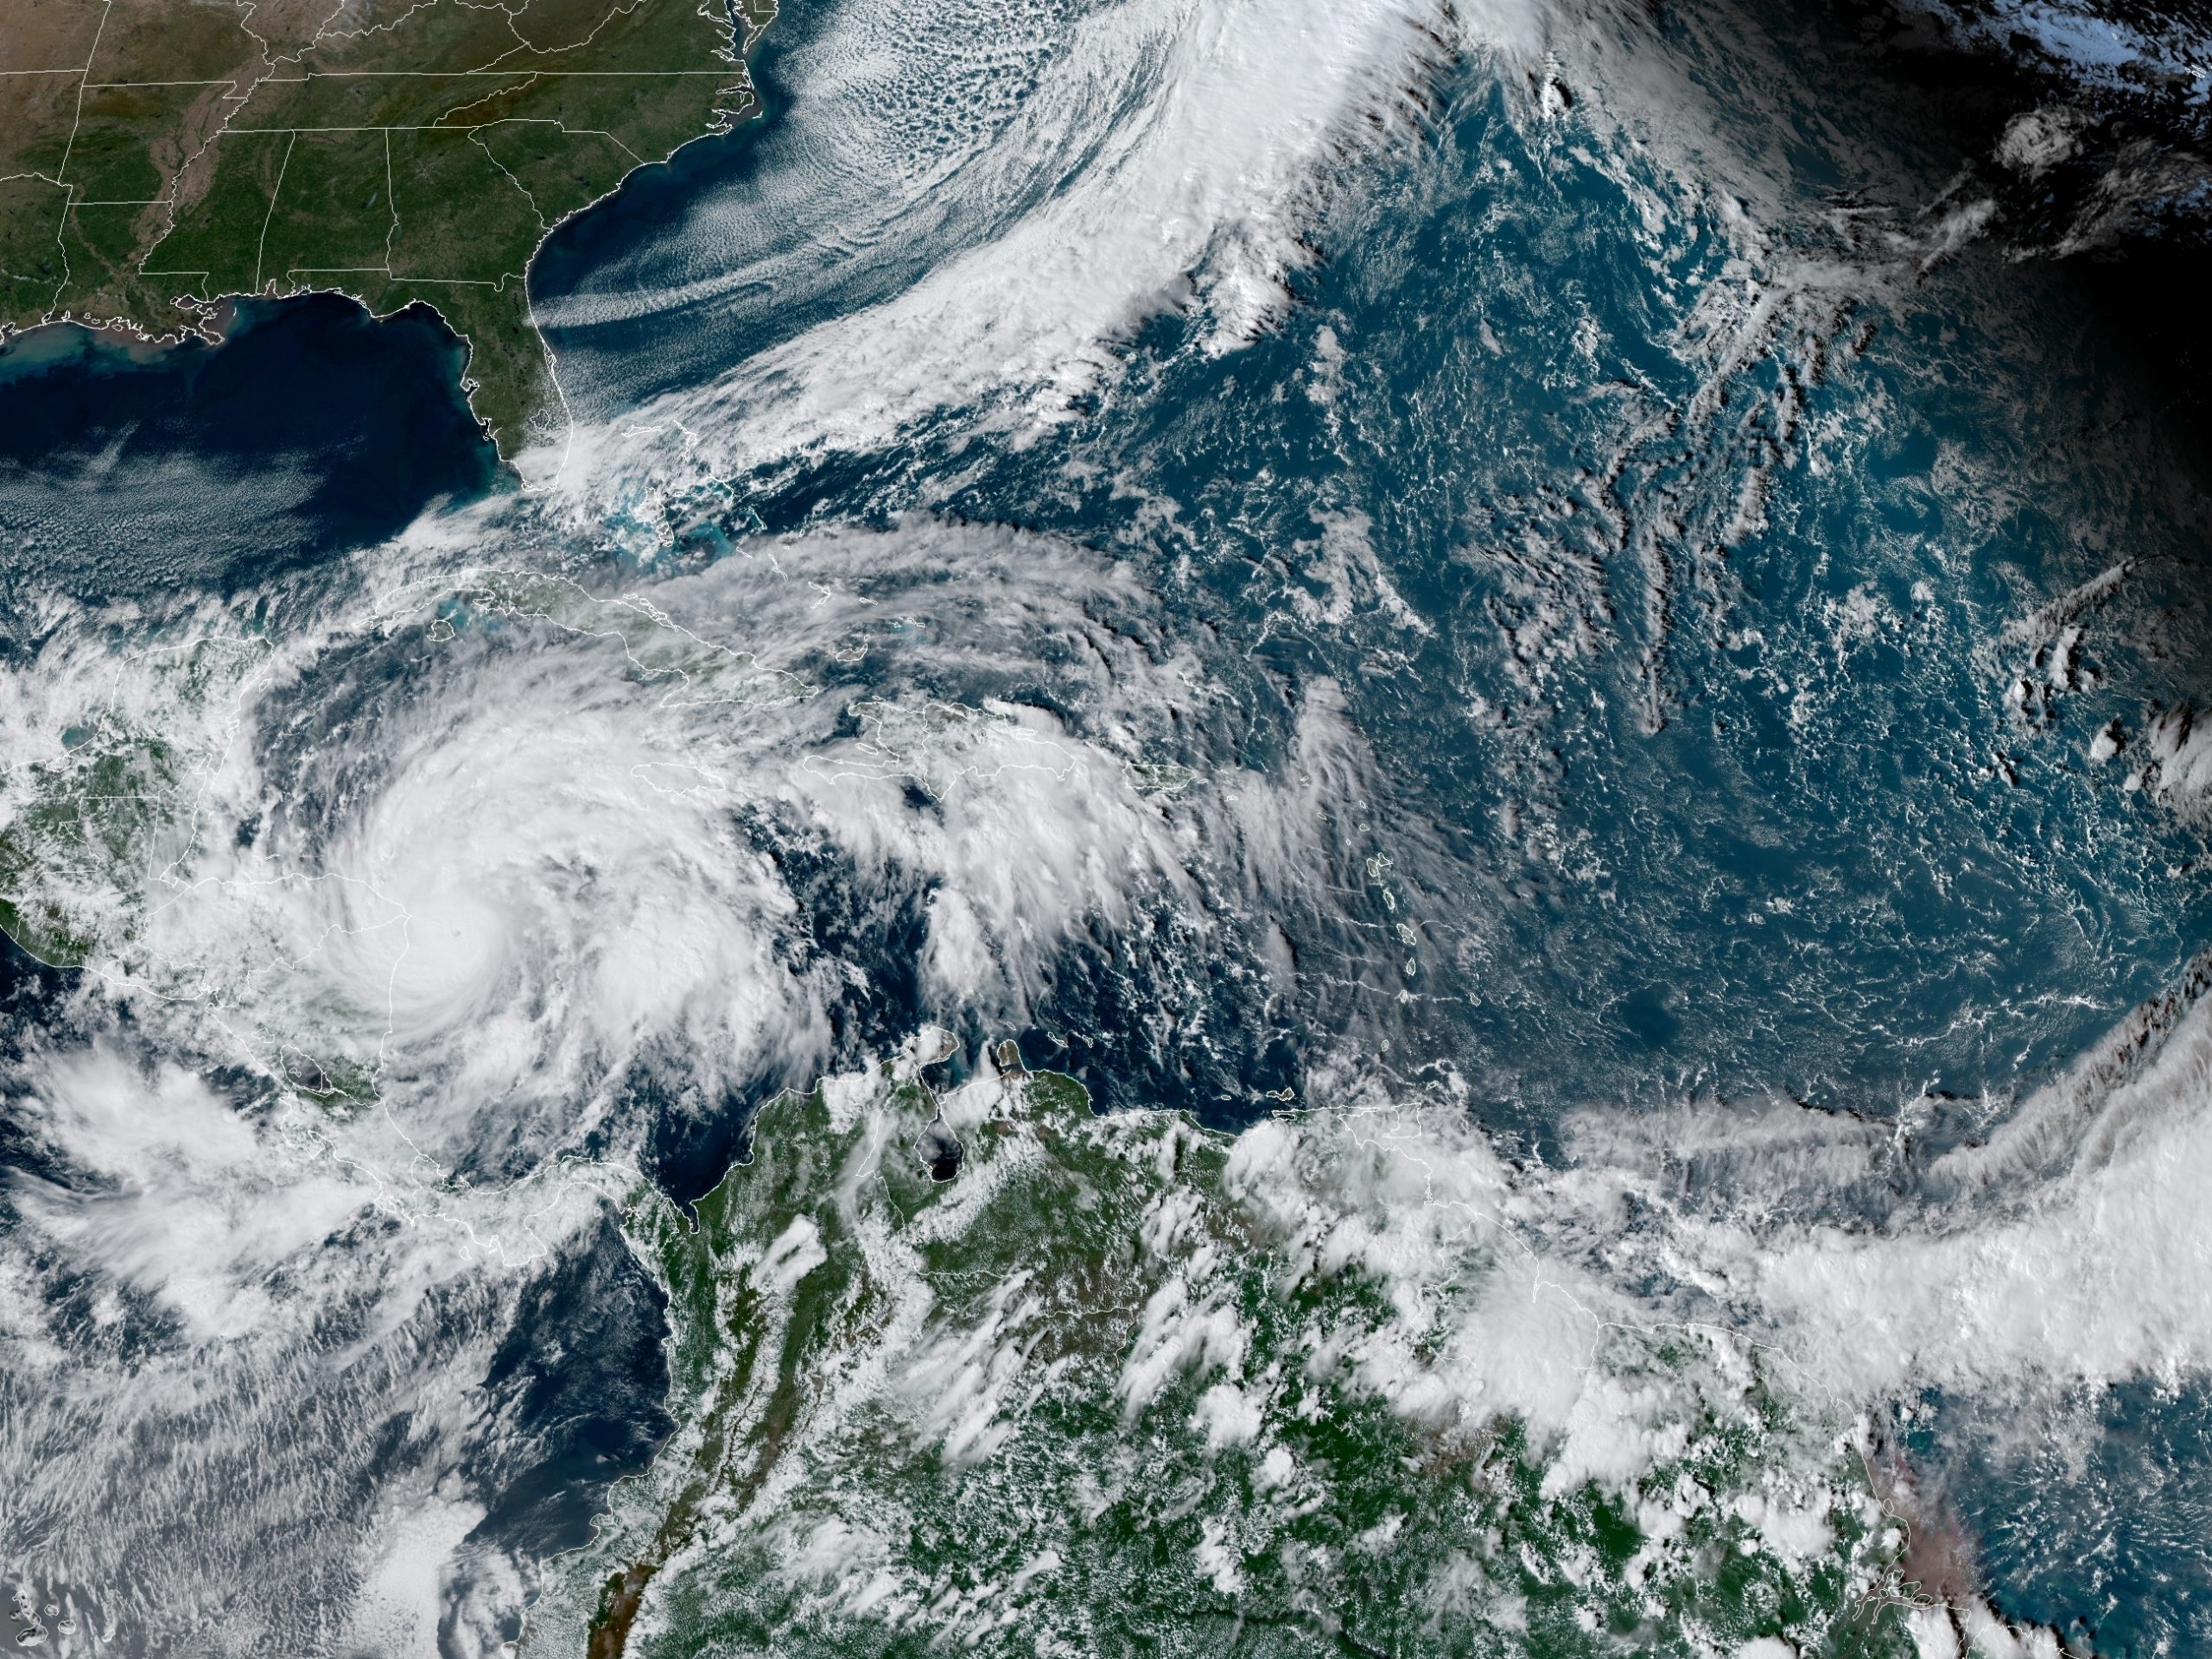 See where our partners appeared in the news on our Hurricane Season 2021 page.